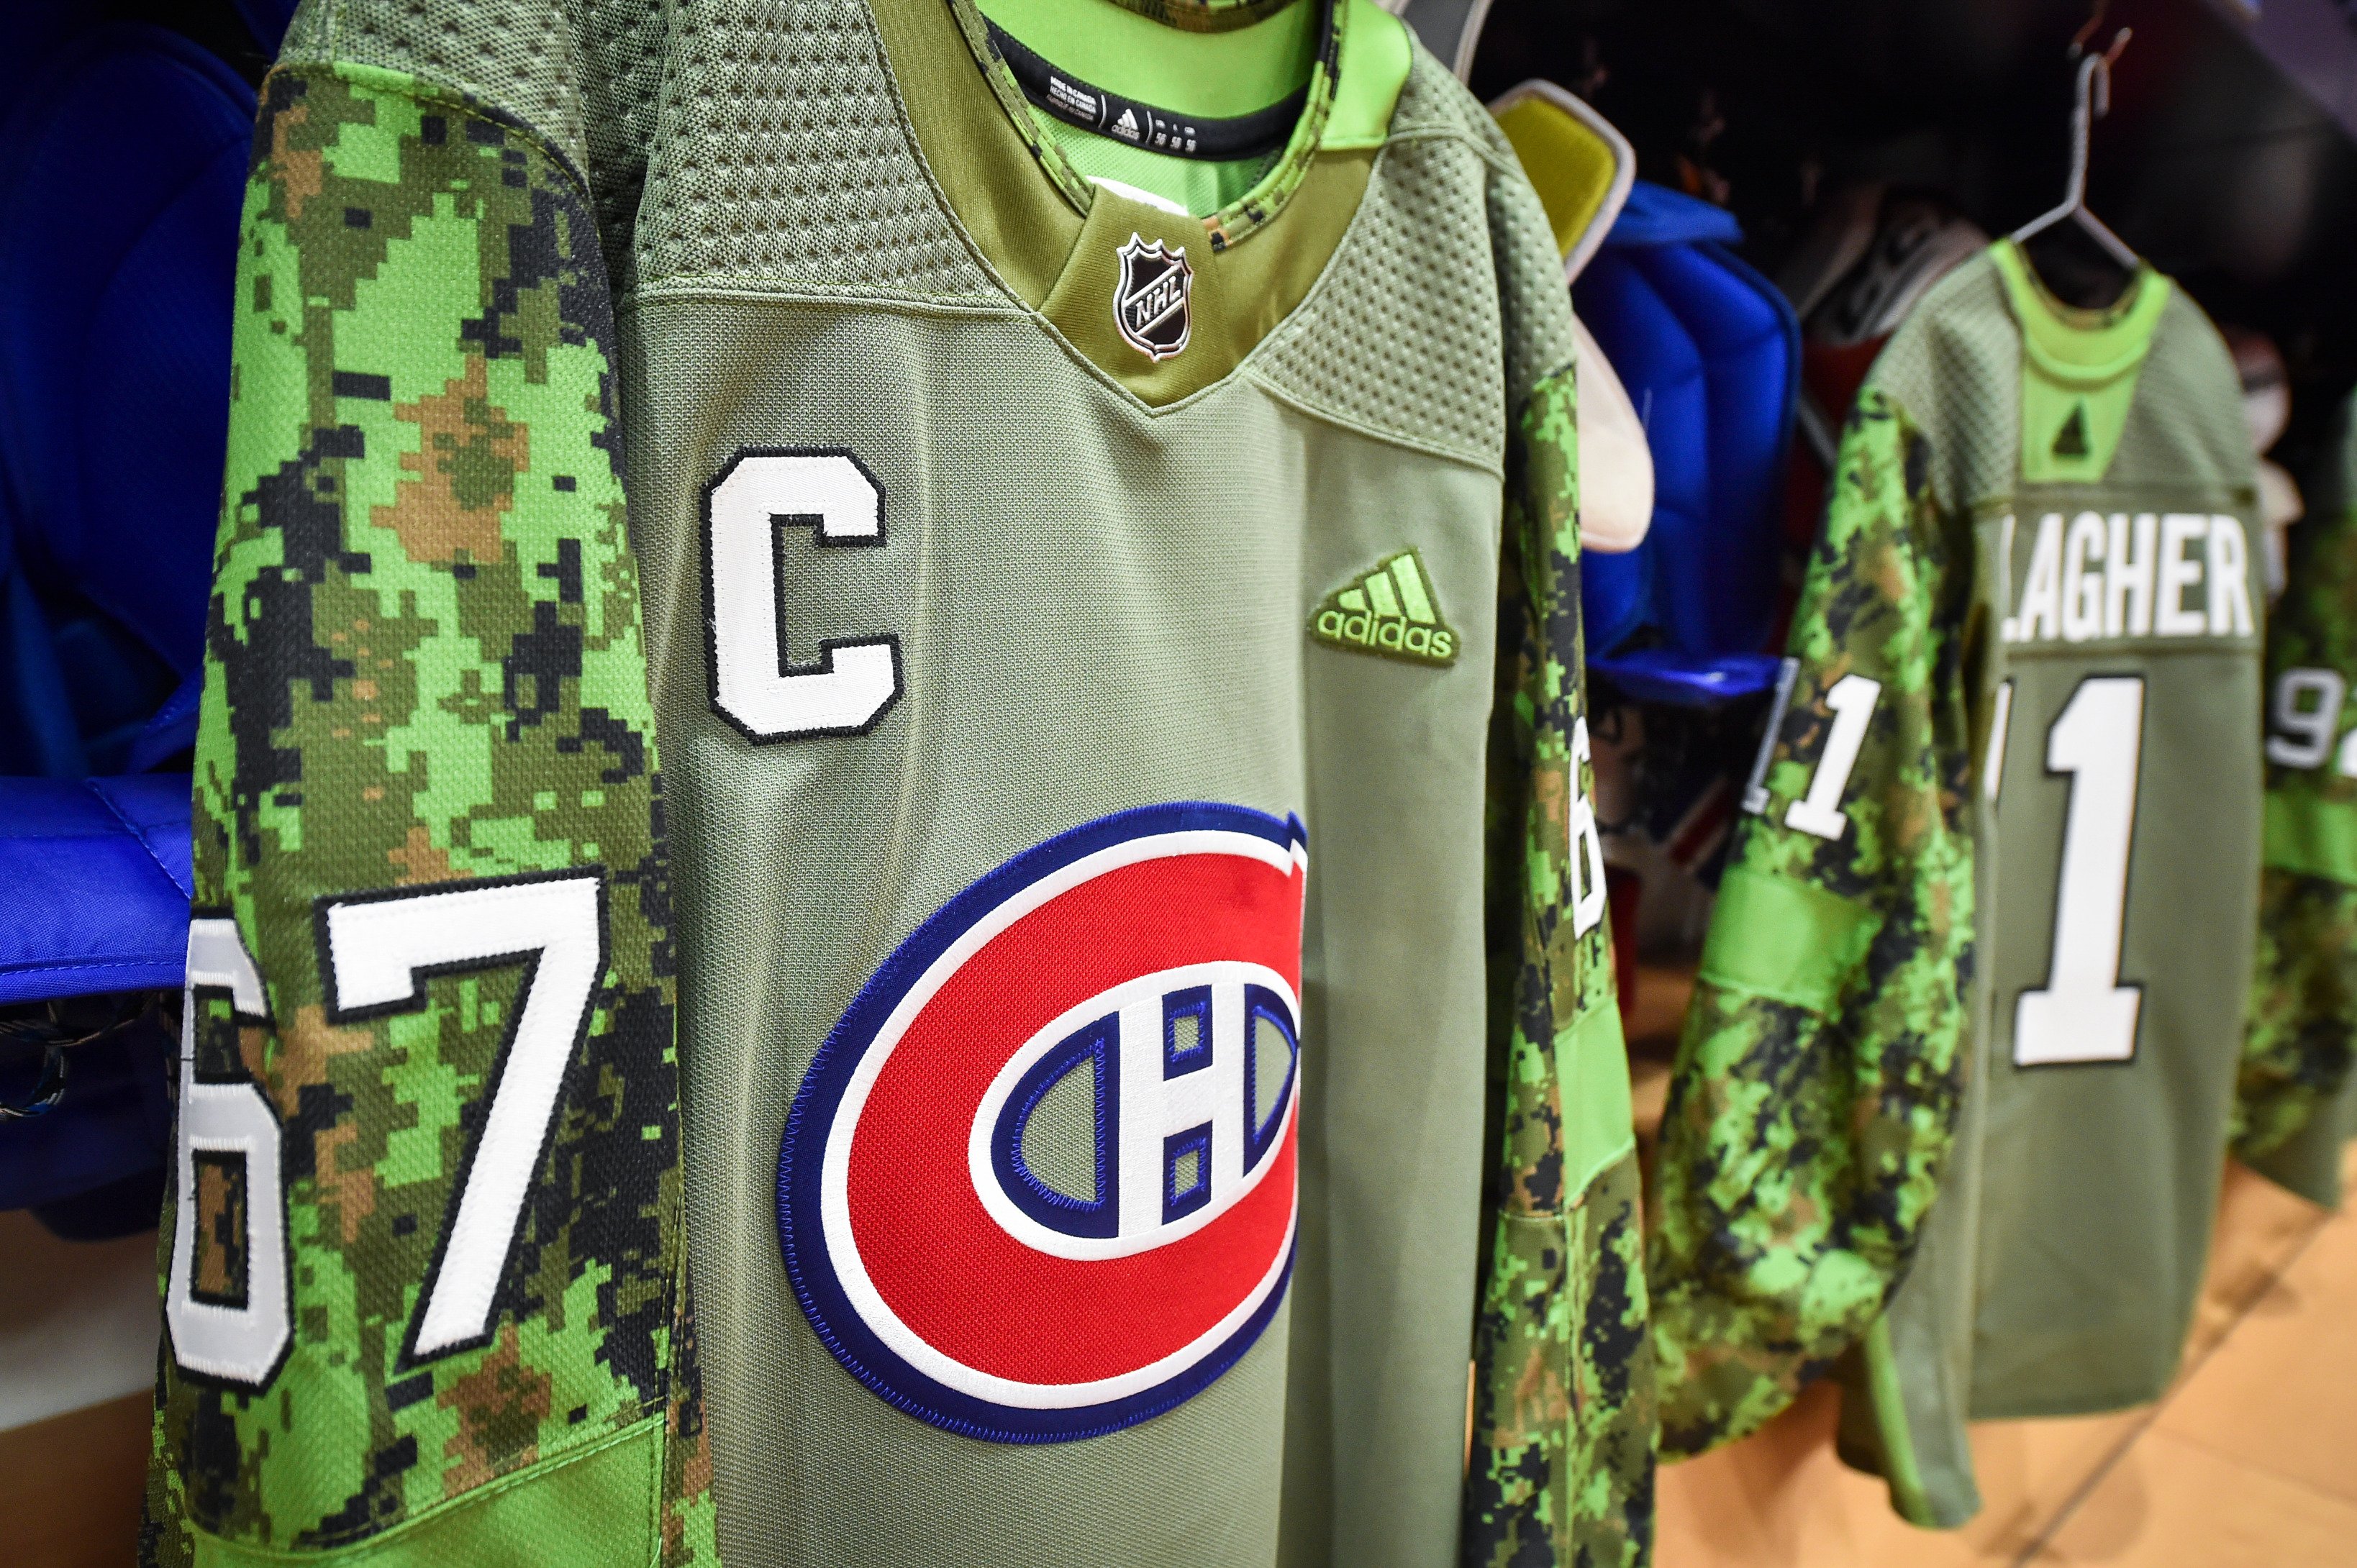 NHL on X: Camo warmup jerseys and poppies were worn to